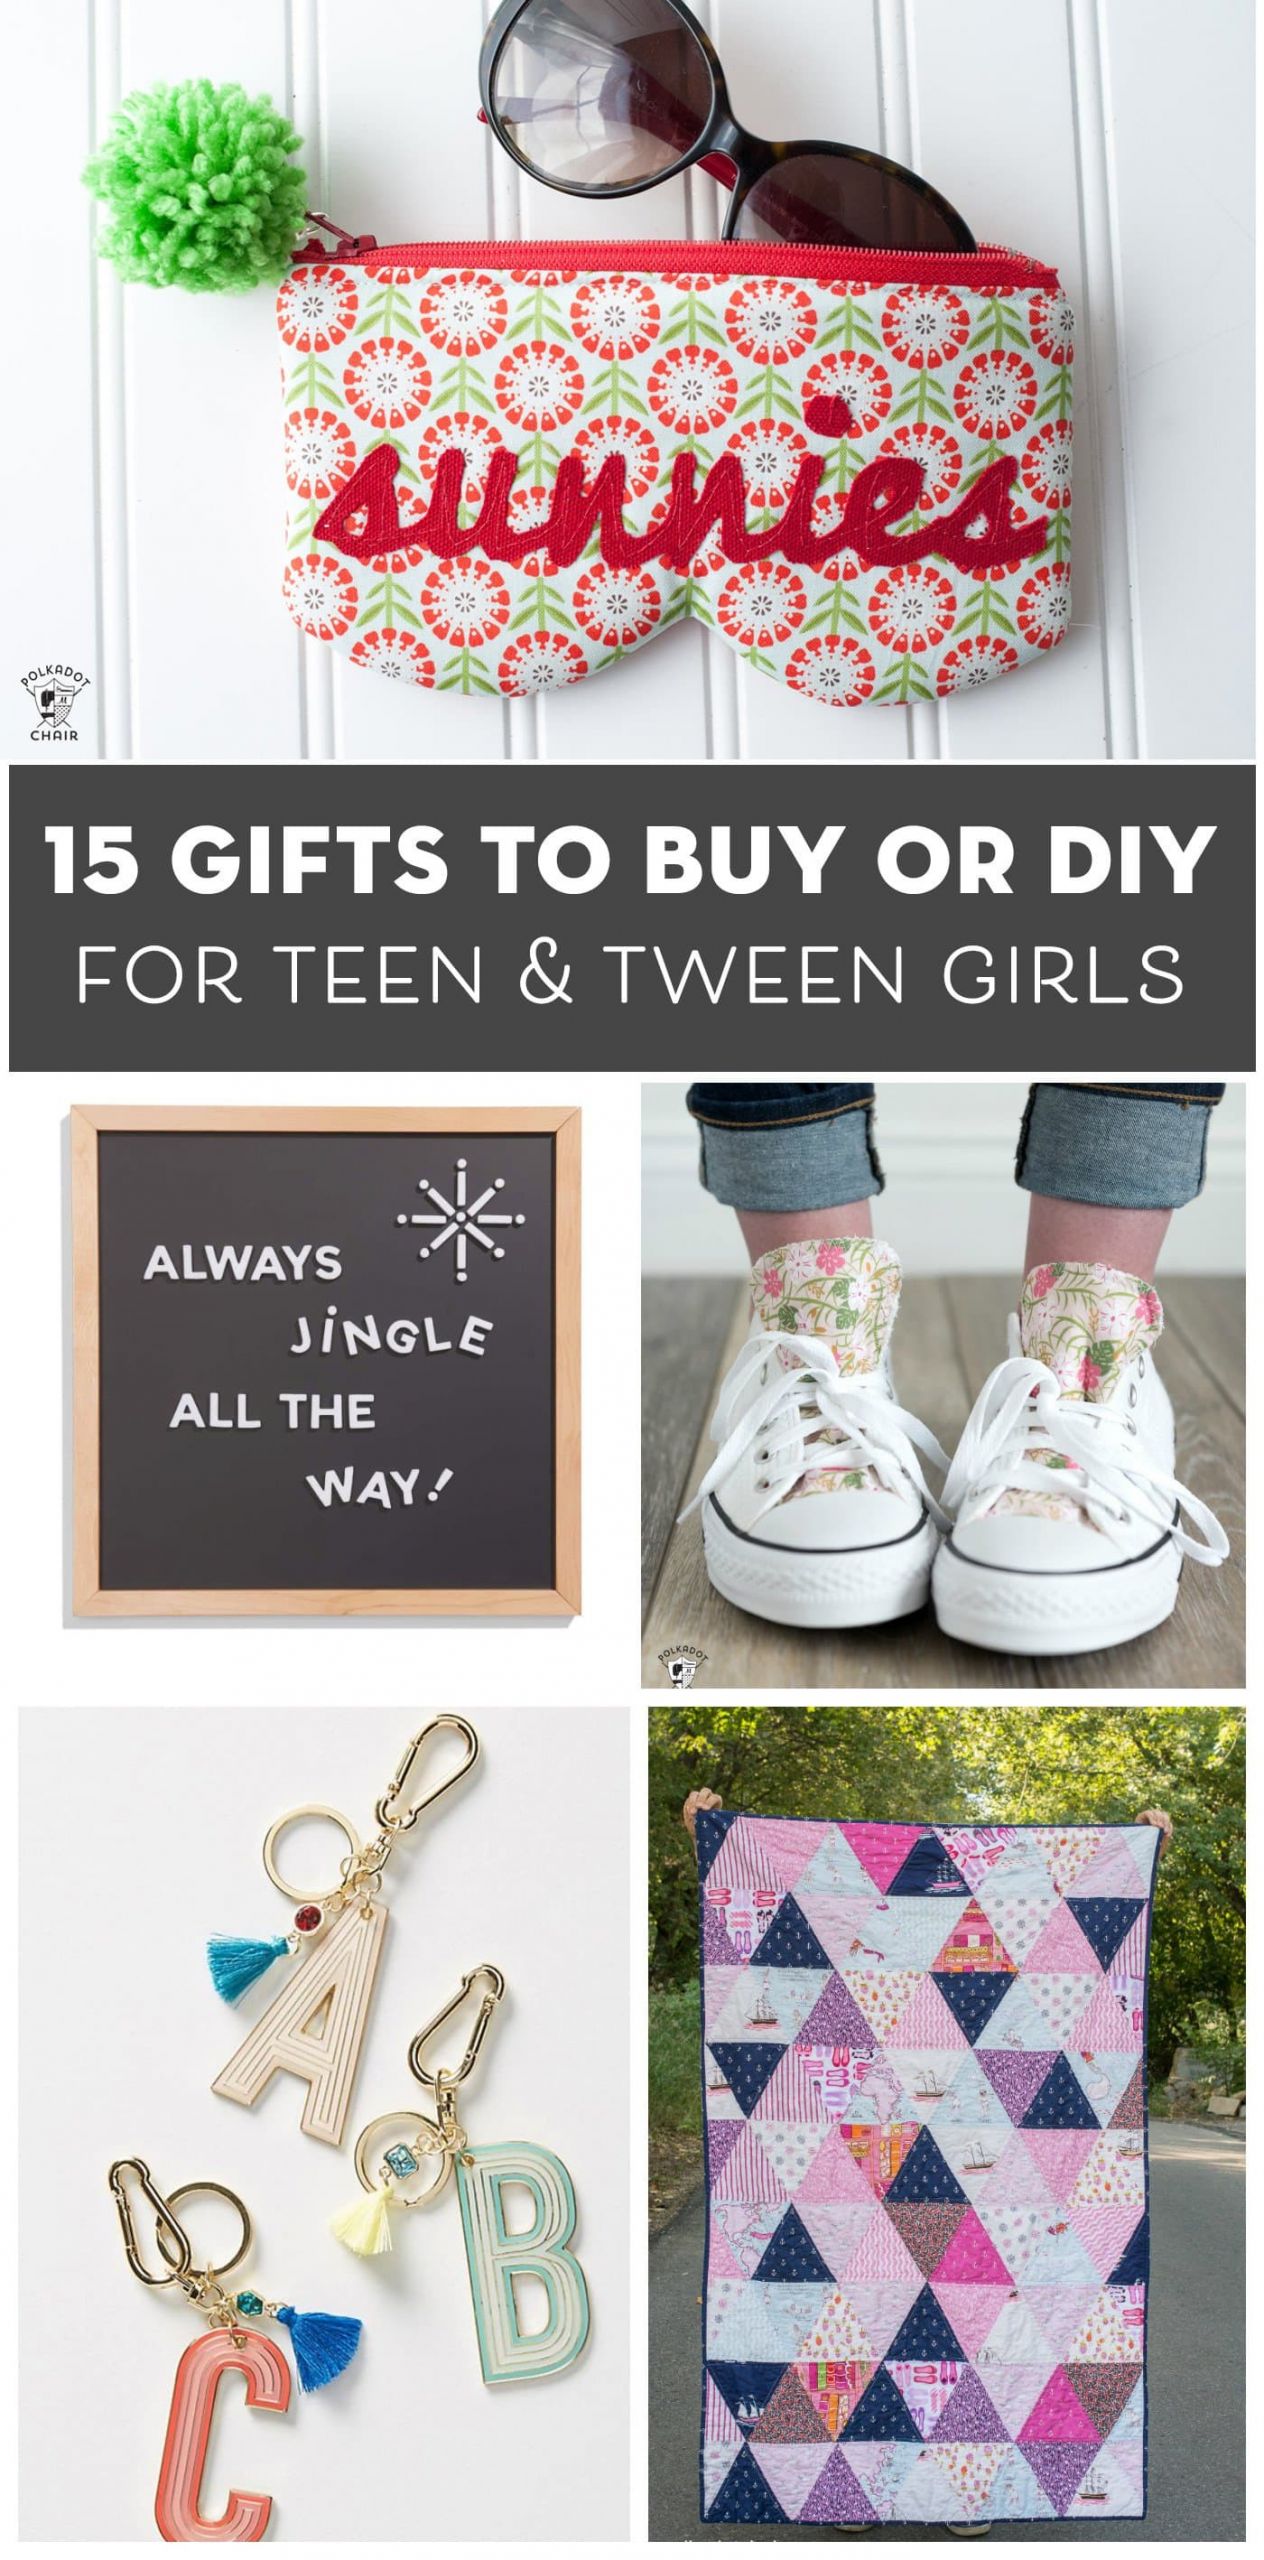 Teenage Girls Gift Ideas
 15 Gift Ideas for Teenage Girls That You Can DIY or Buy